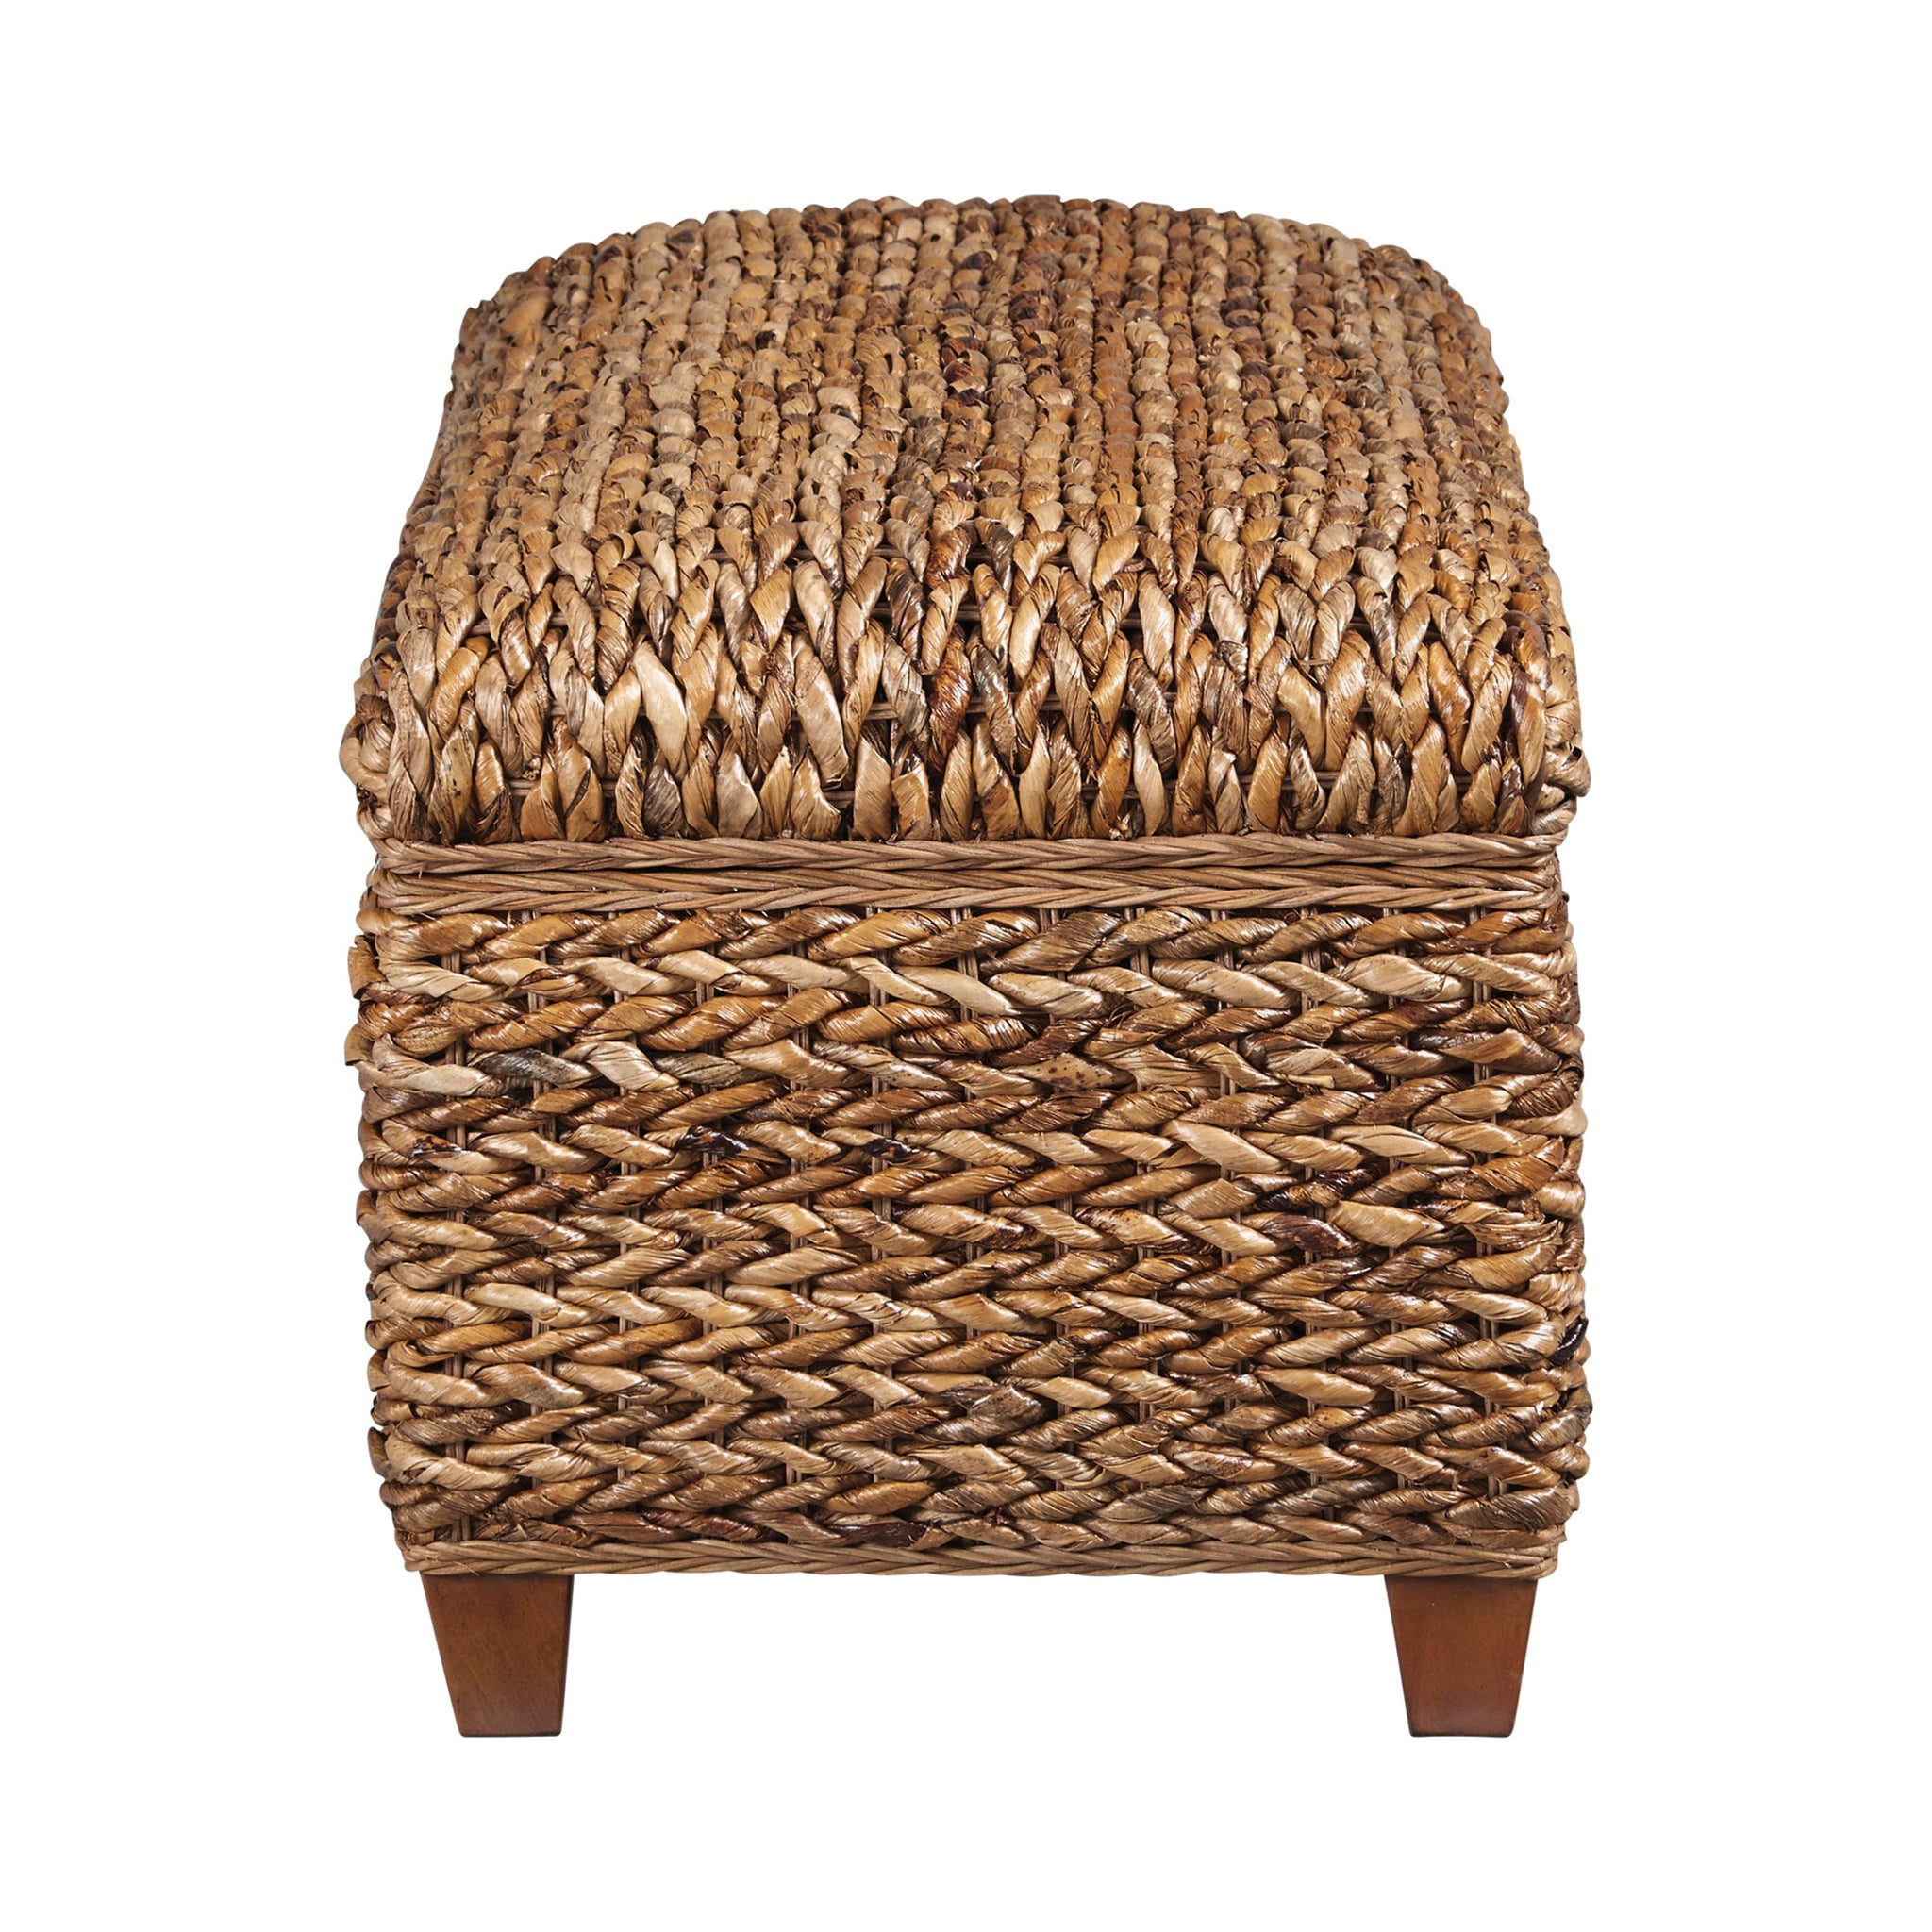 Laughton Hand-Woven Storage Trunk Amber - 500215